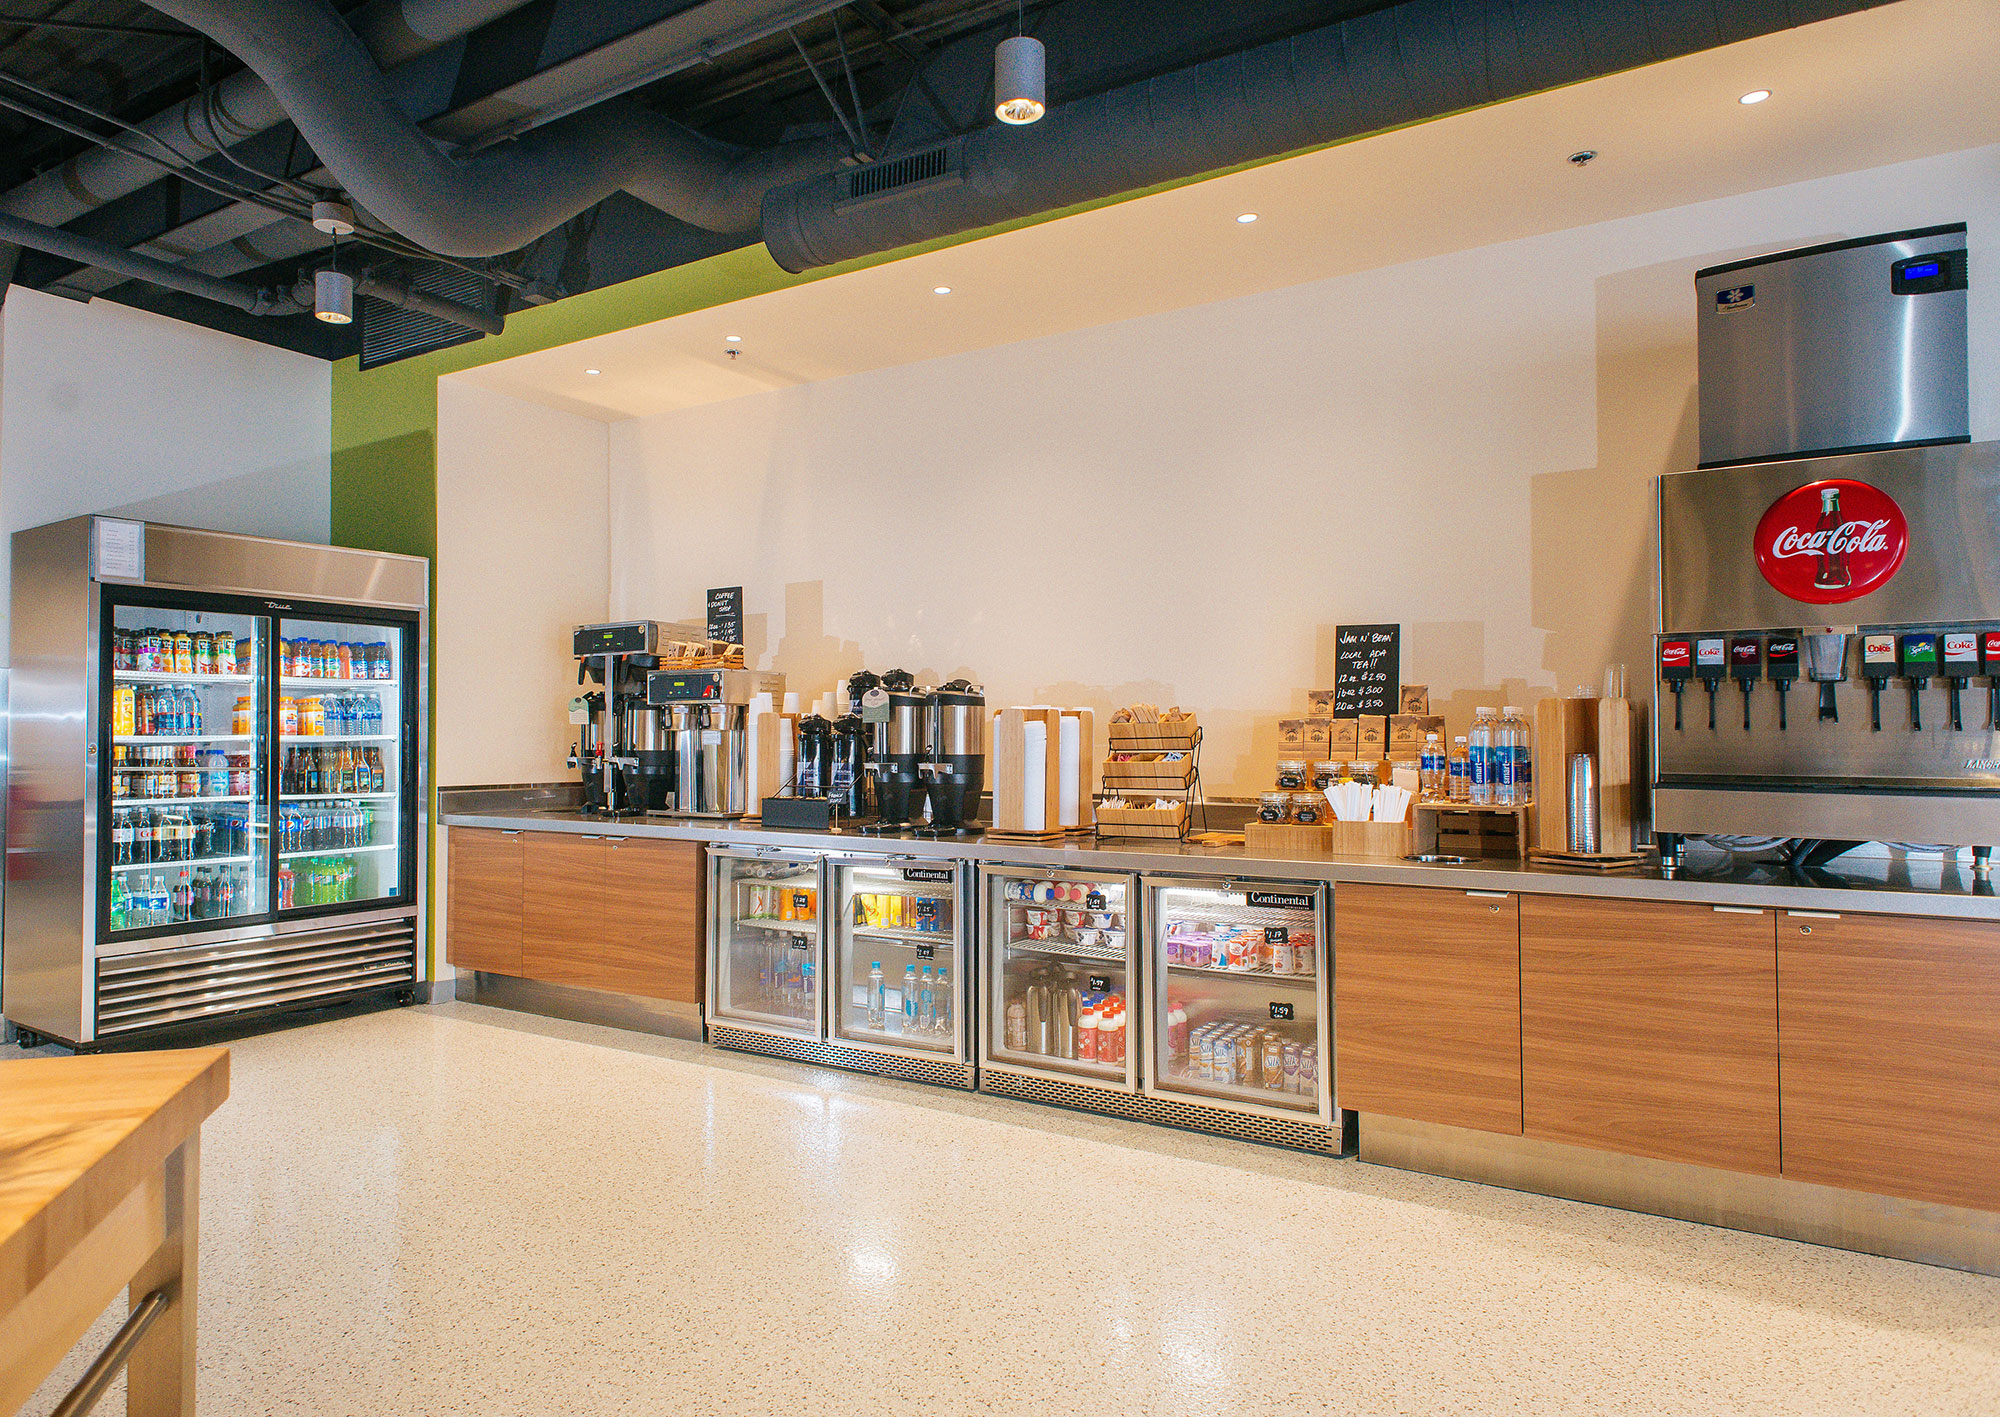 Commercial Kitchen University Dining Area Coffee Bar